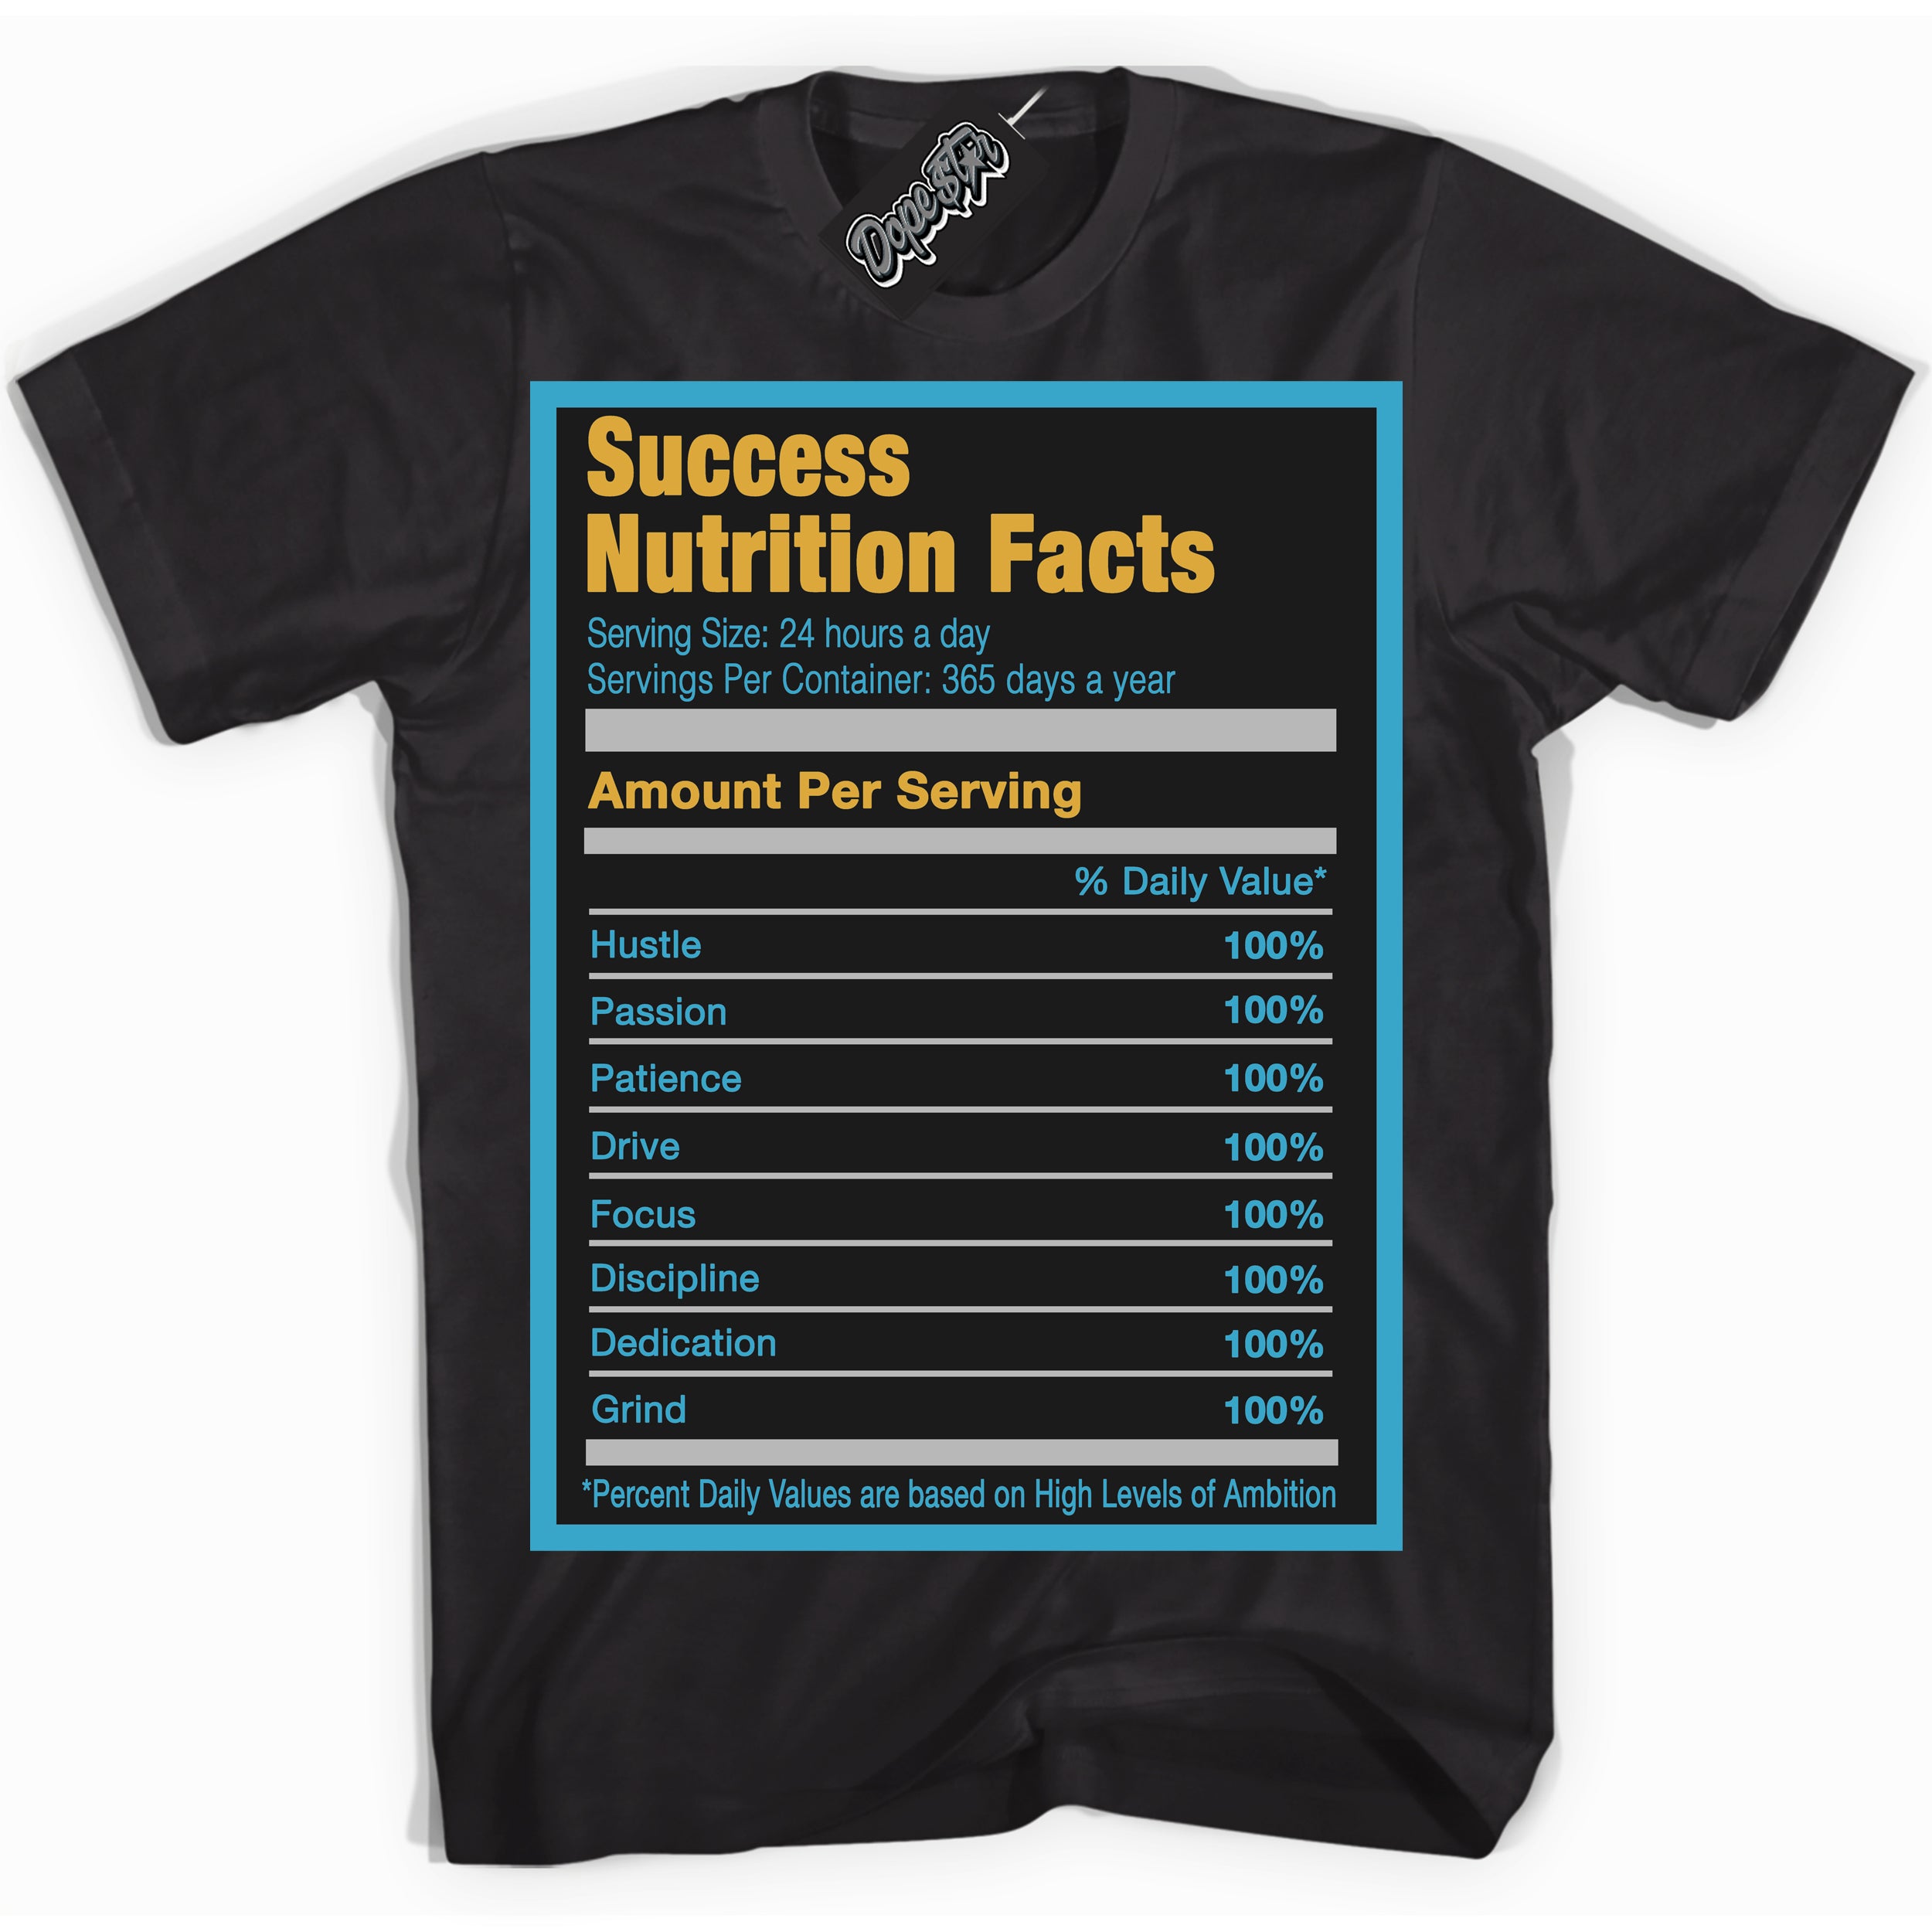 Cool Black Shirt with “ Success Nutrition” design that perfectly matches Aqua 5s Sneakers.